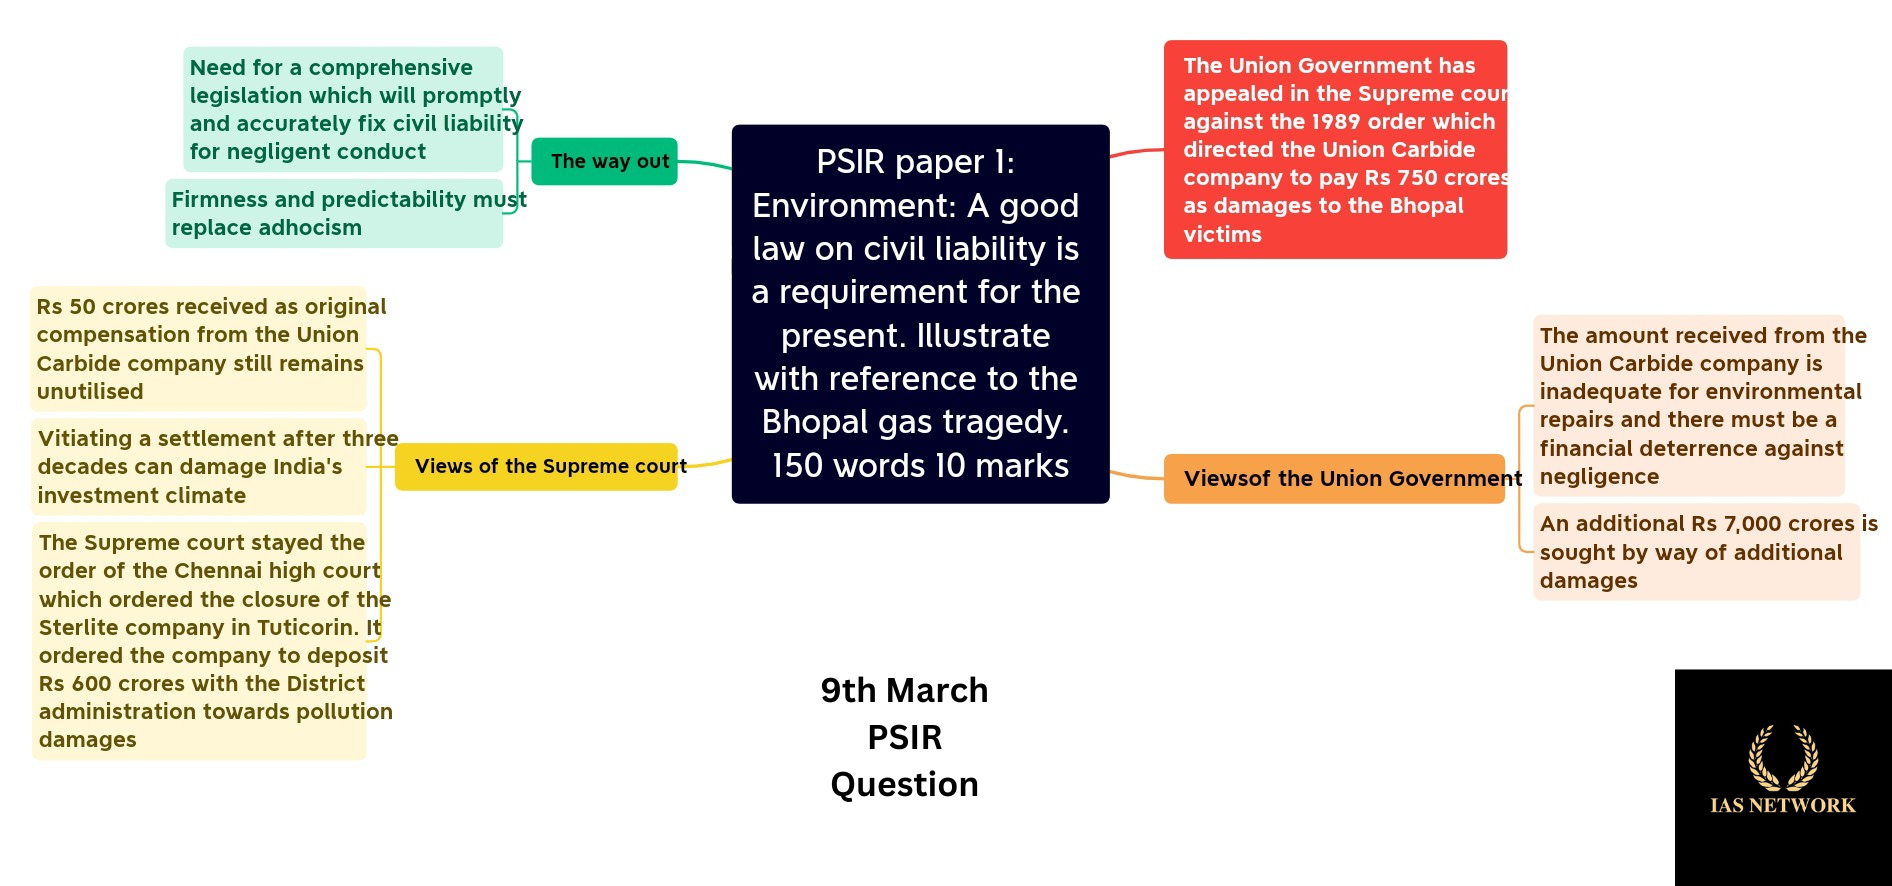 IAS NETWORK 9th MARCH PSIR QUESTION